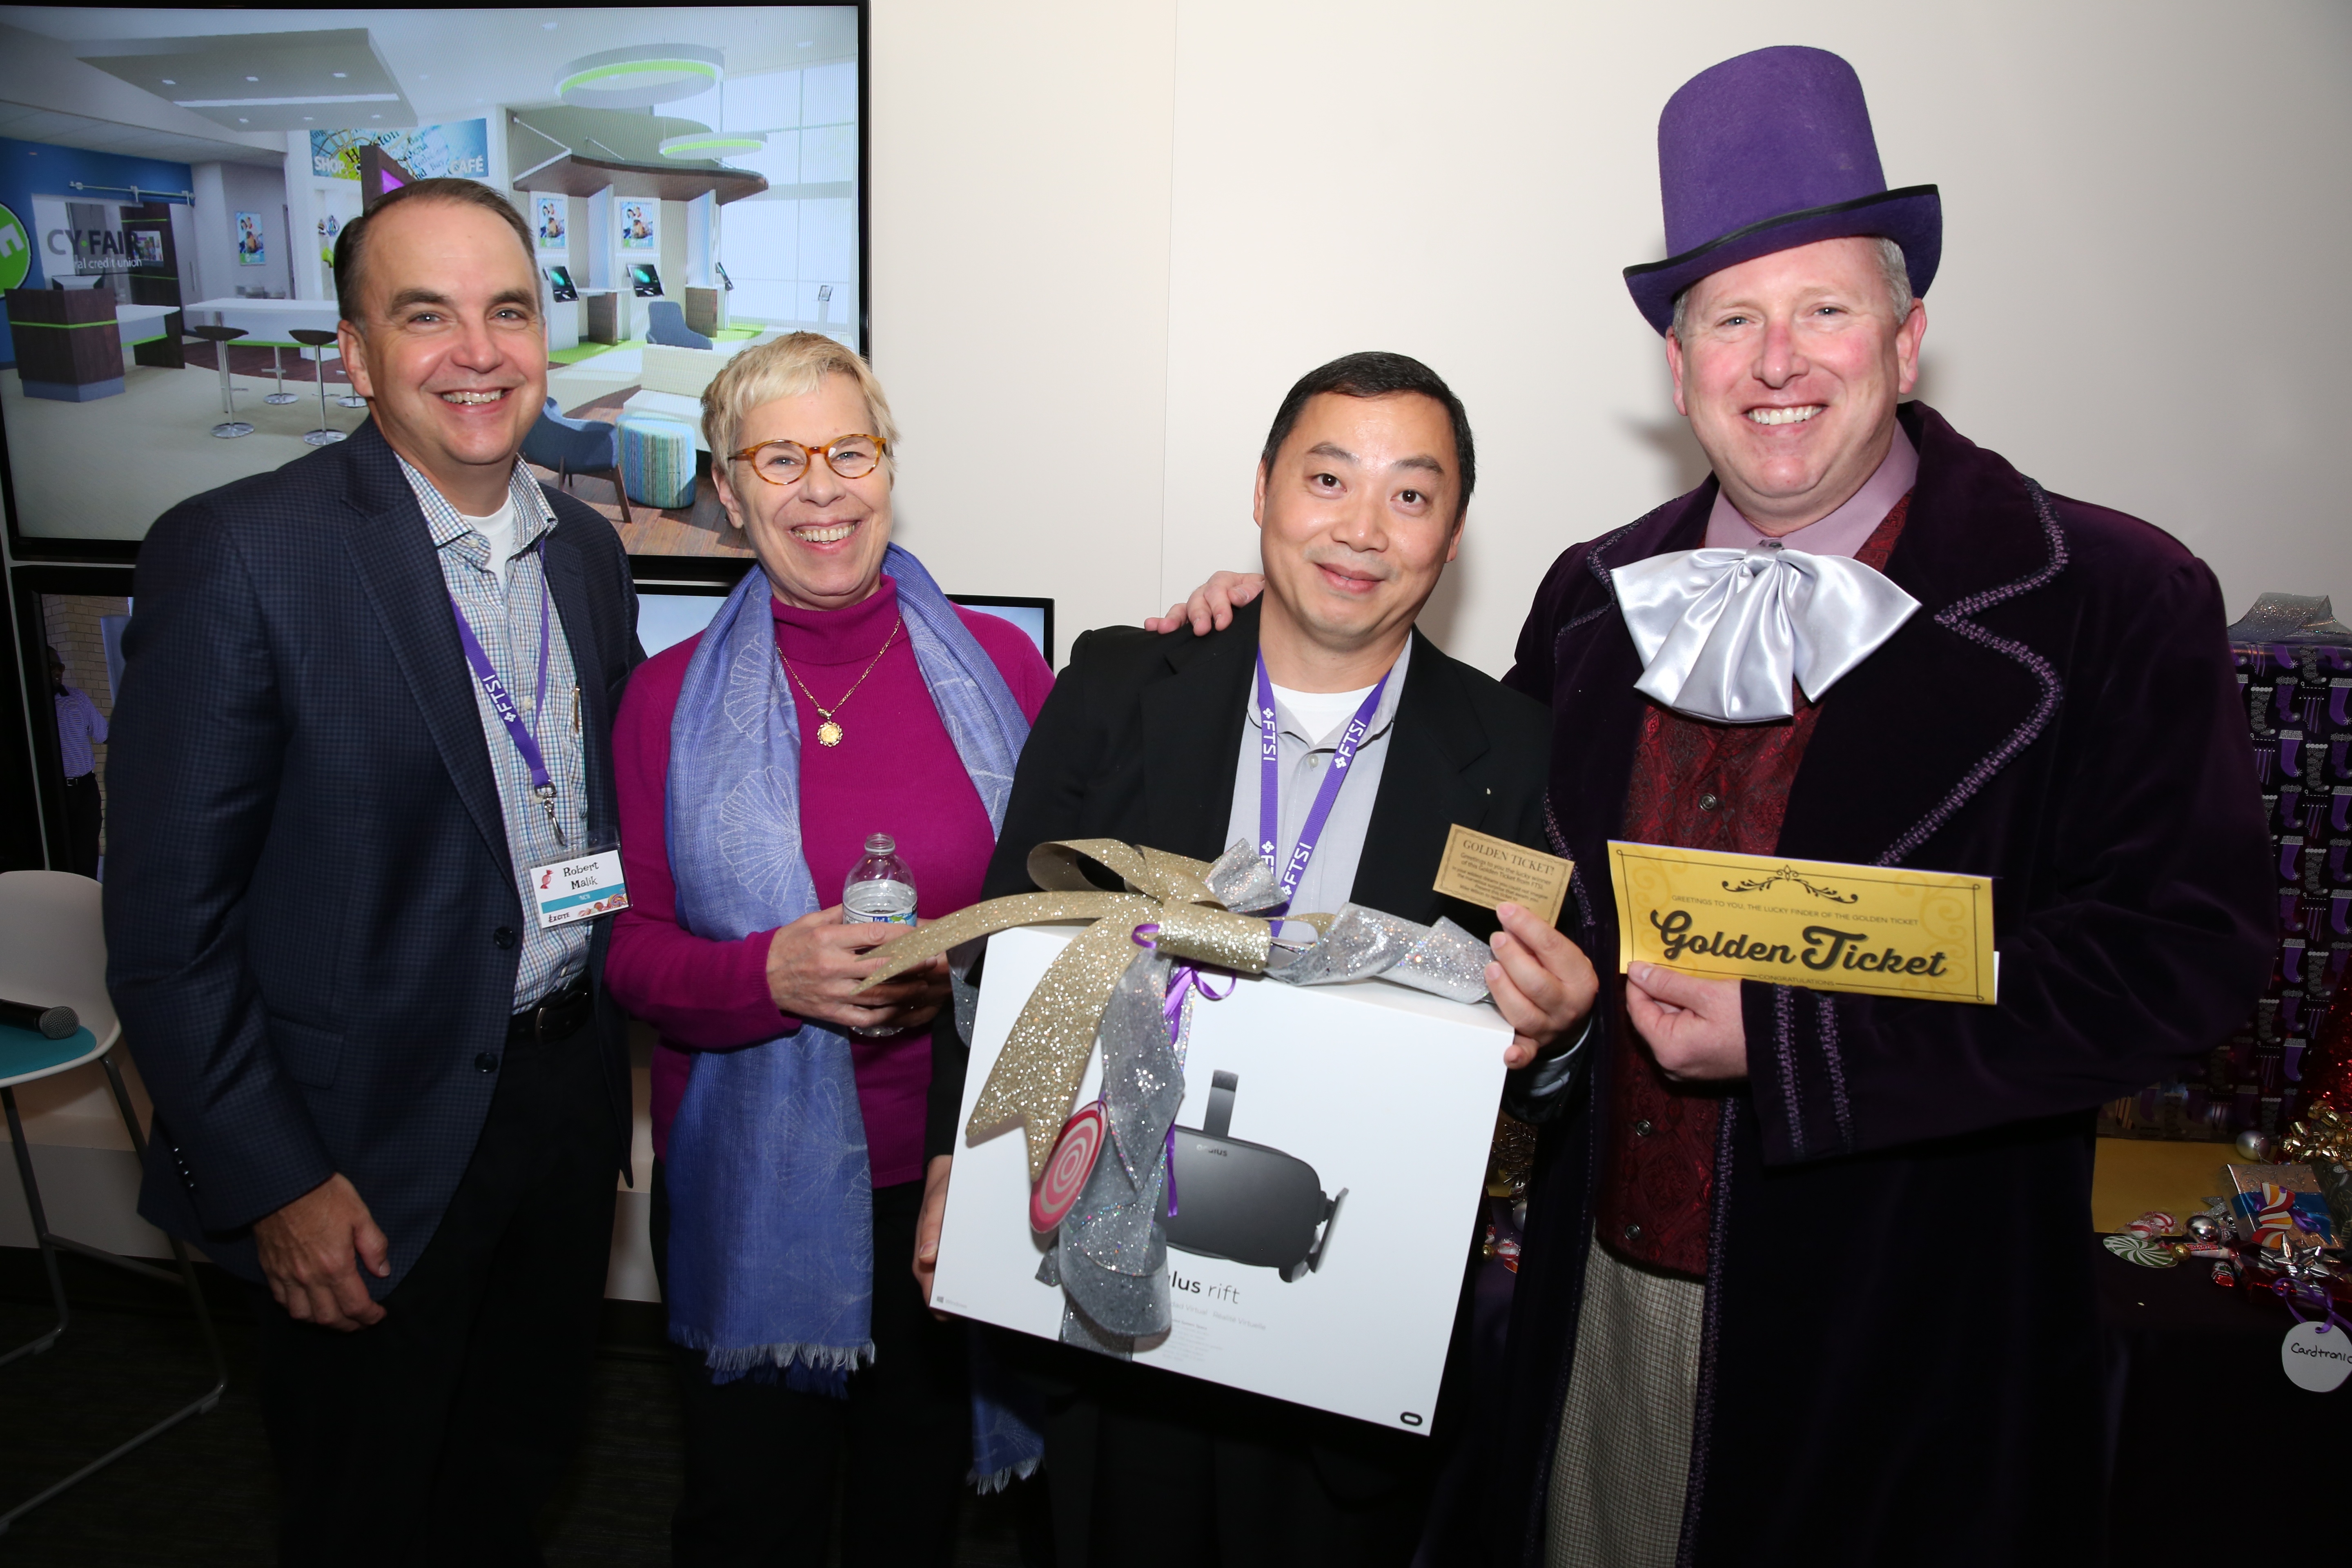 Four people dressed in Willy Wonka inspired clothing holding prizes and a golden ticket